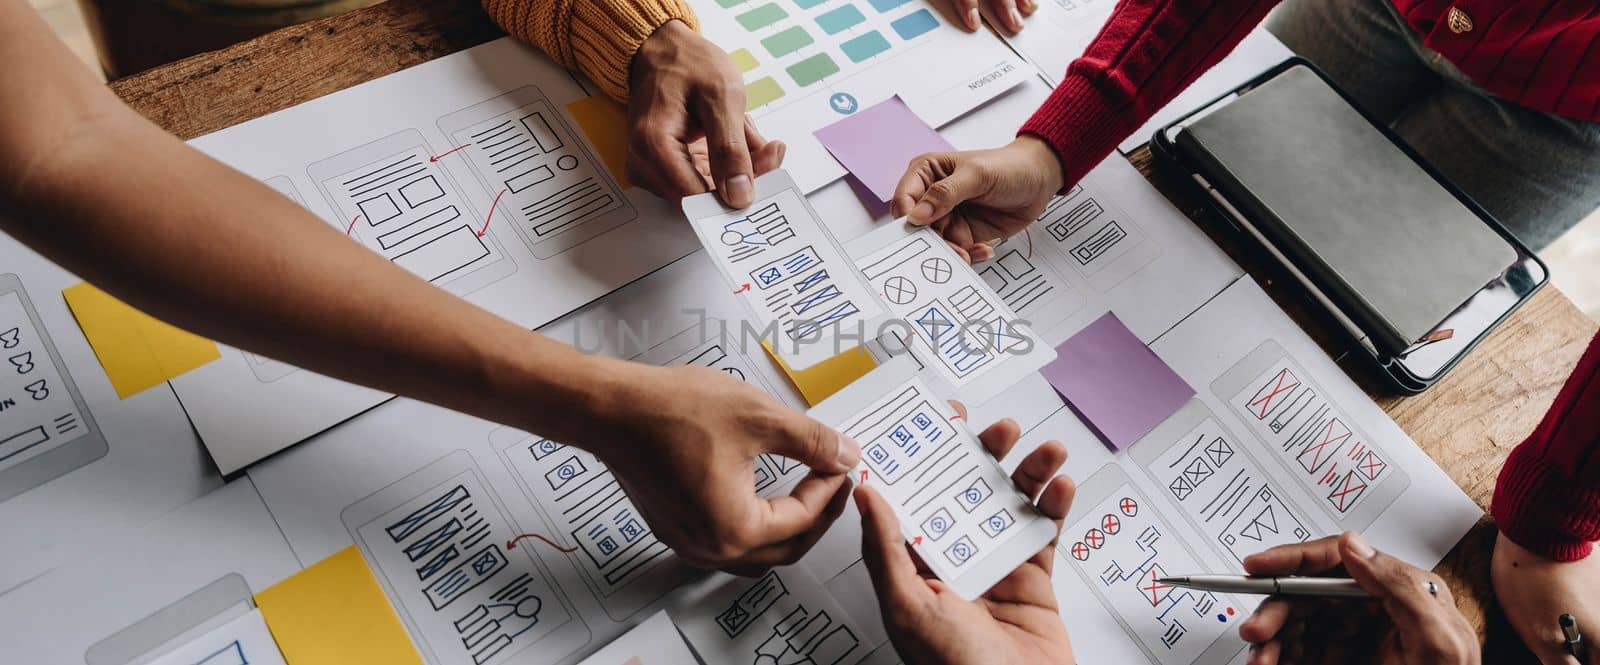 UI UX creative designer team designing wireframe layout for responsive mobile smartphone application in office.